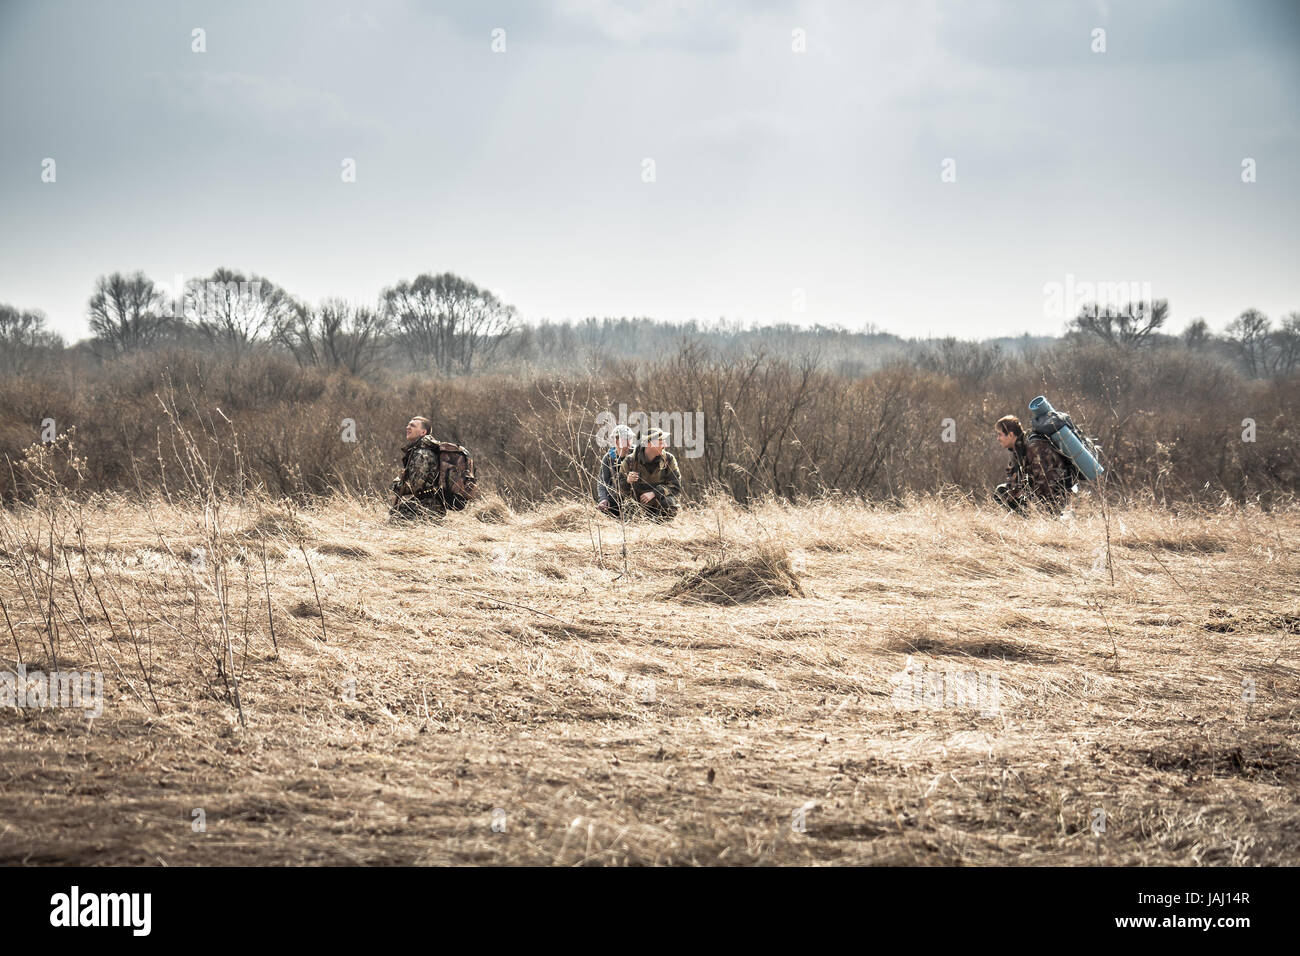 Group of hunters hiding in rural field with dry grass during hunting season in overcast day Stock Photo